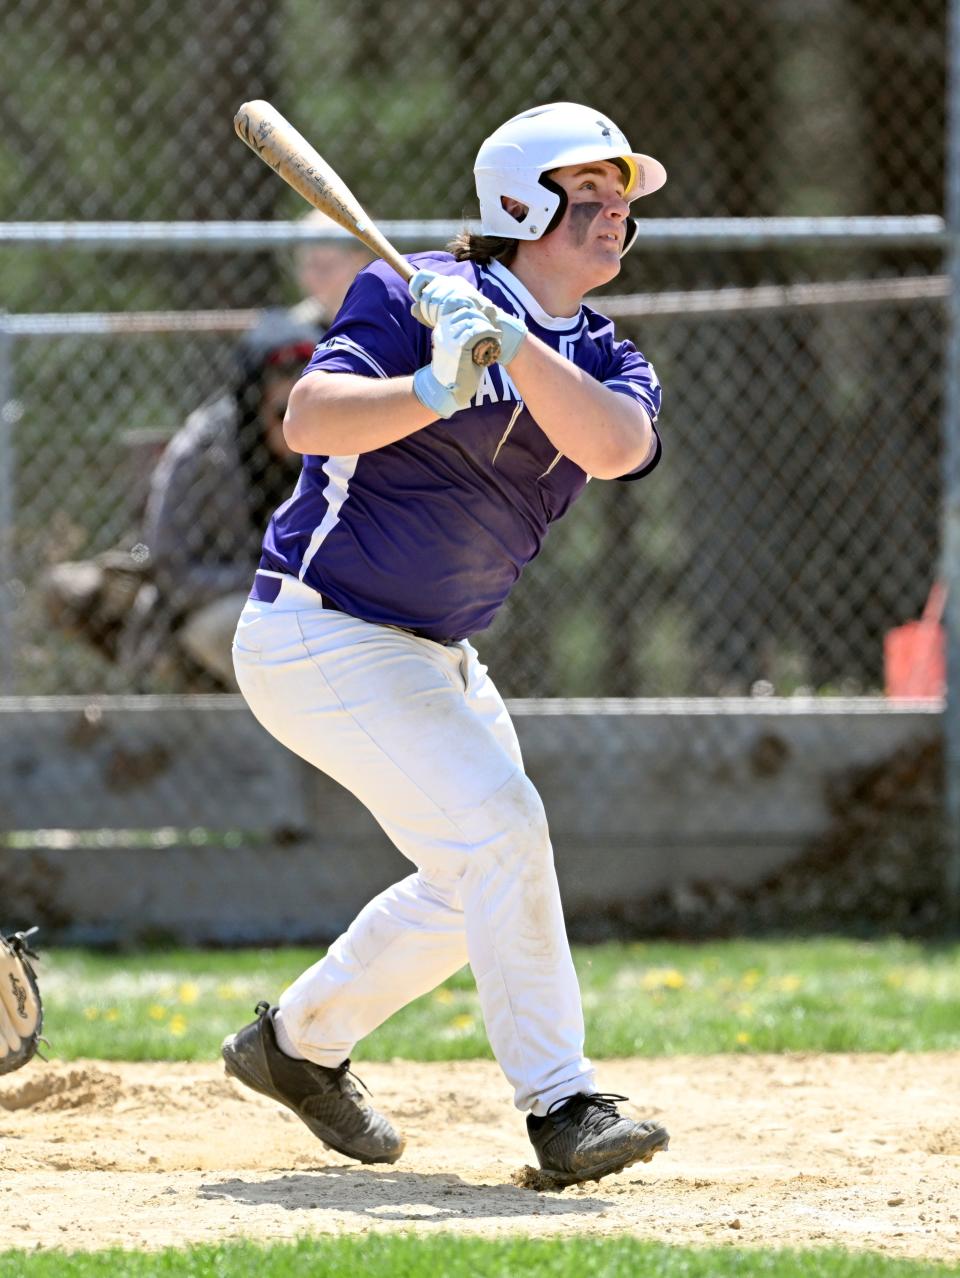 Luca Finton of Bourne drives the ball deep in center for a triple against Wareham on April 21.